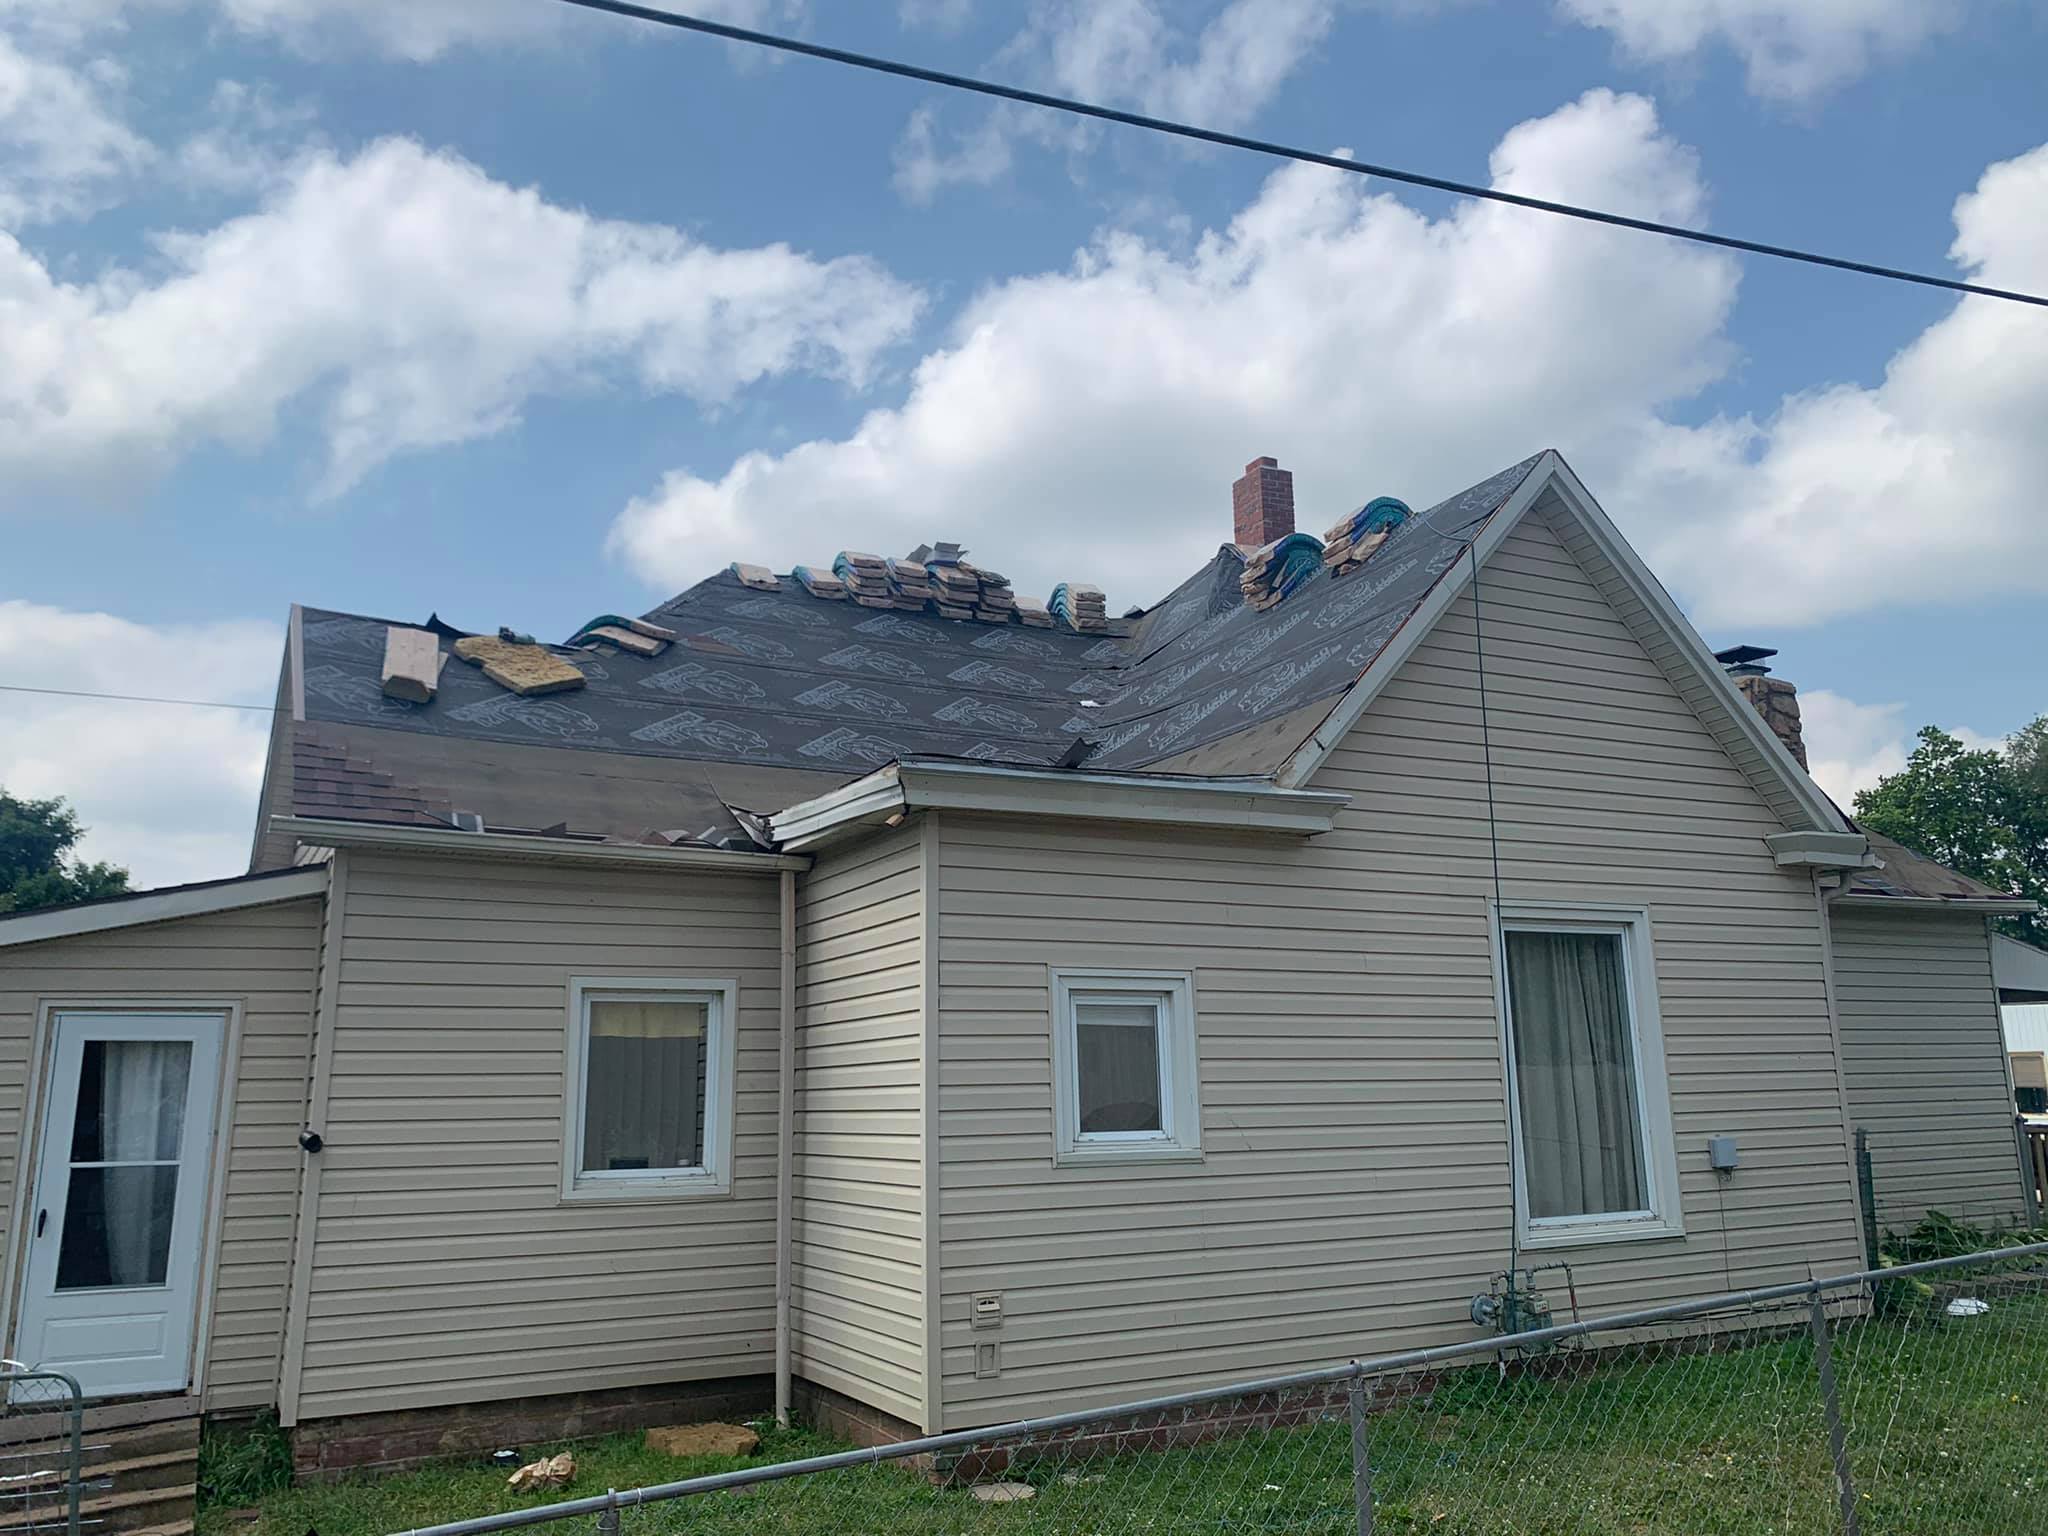 Roofing Companies Leavenworth Kansas - Tips To Find The Best Company